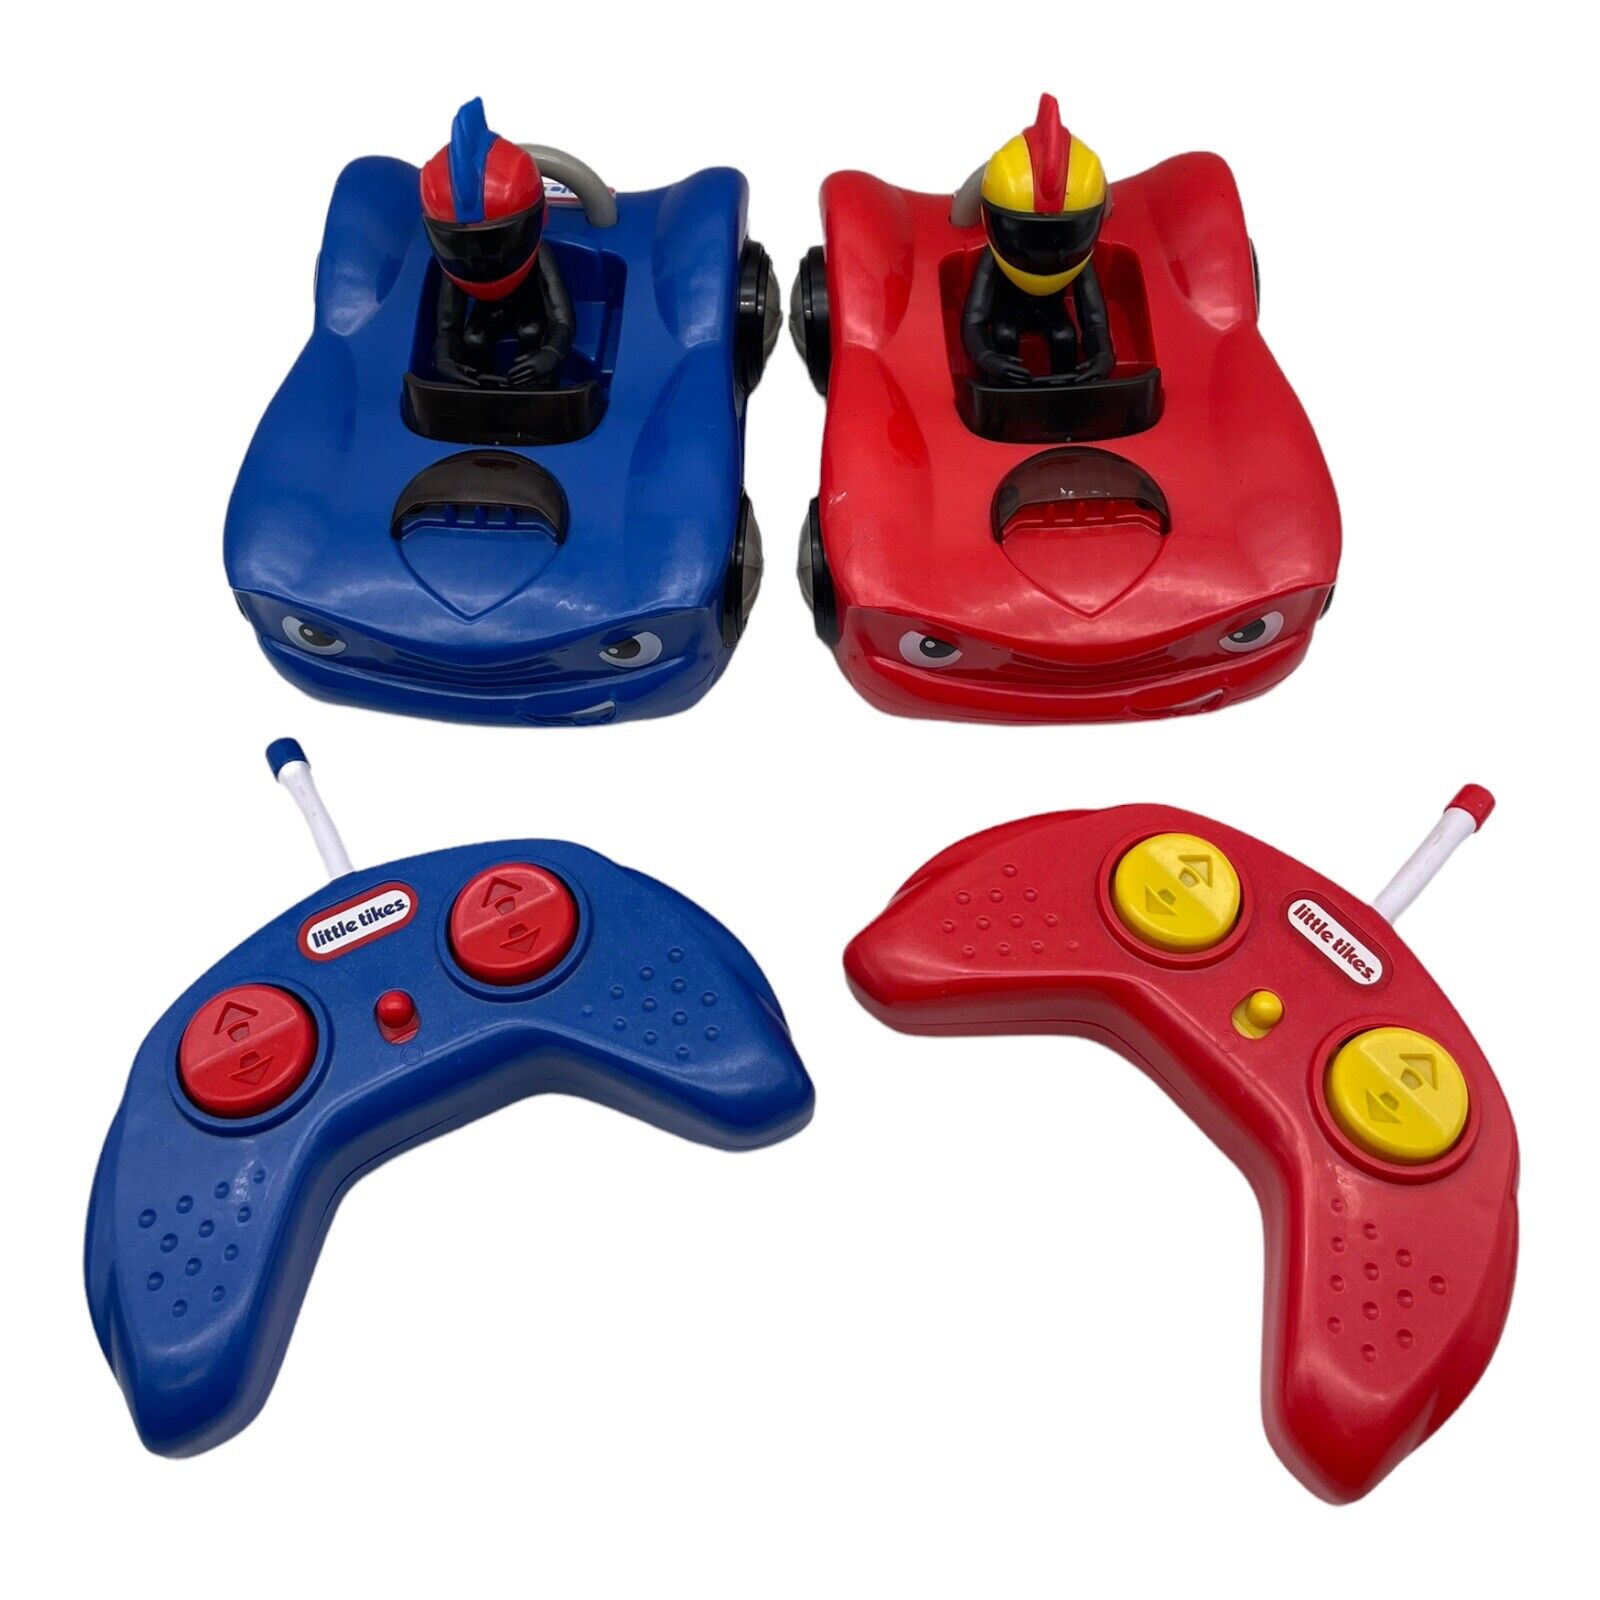 Little Tikes RC Wheelz Bumper Race Cars Red & Blue Complete Works